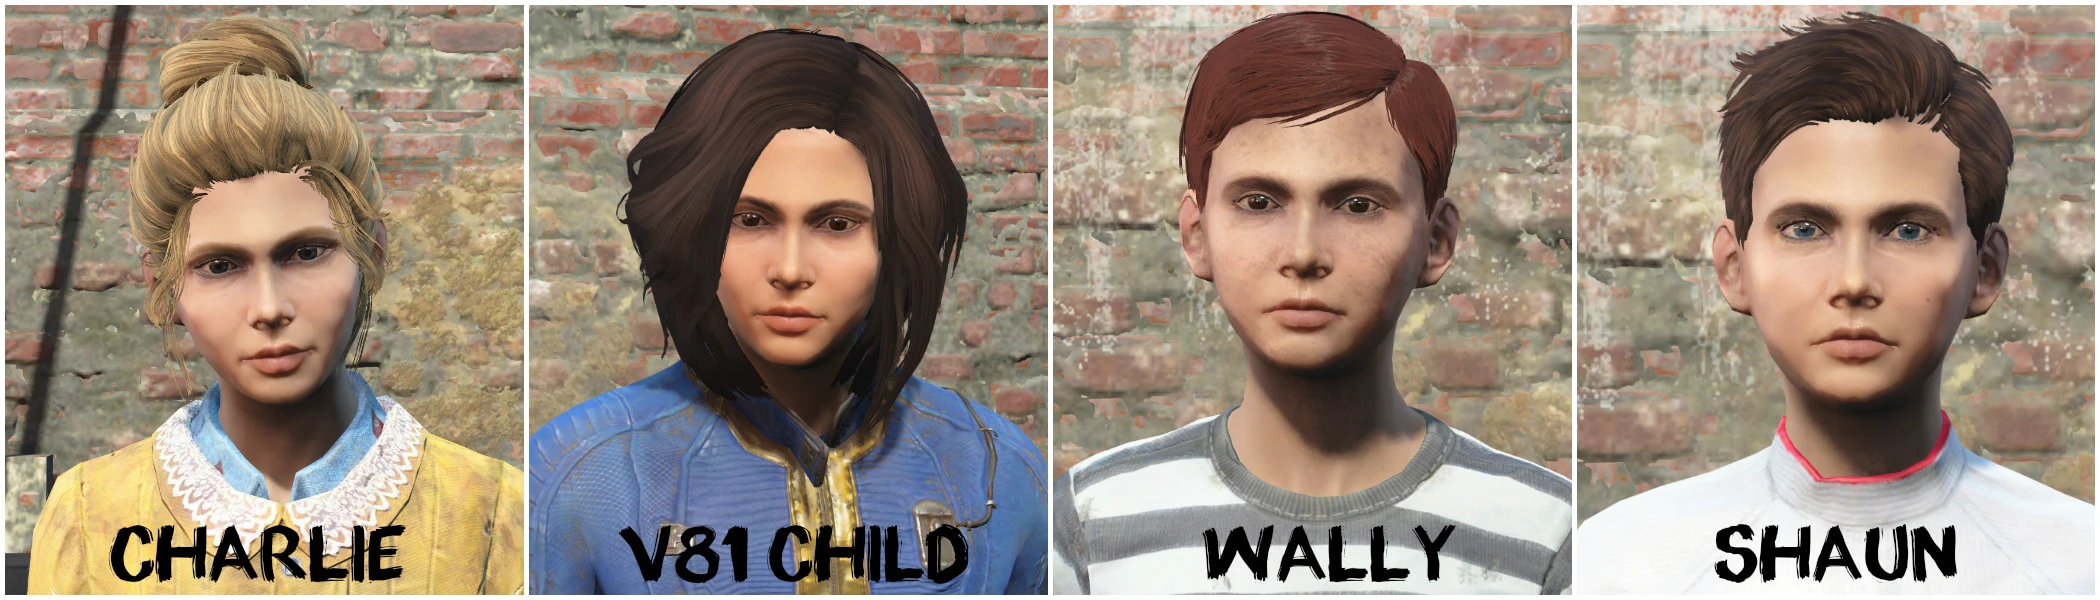 ANiceOakTree's Diverse Children at Fallout 4 Nexus - Mods and community